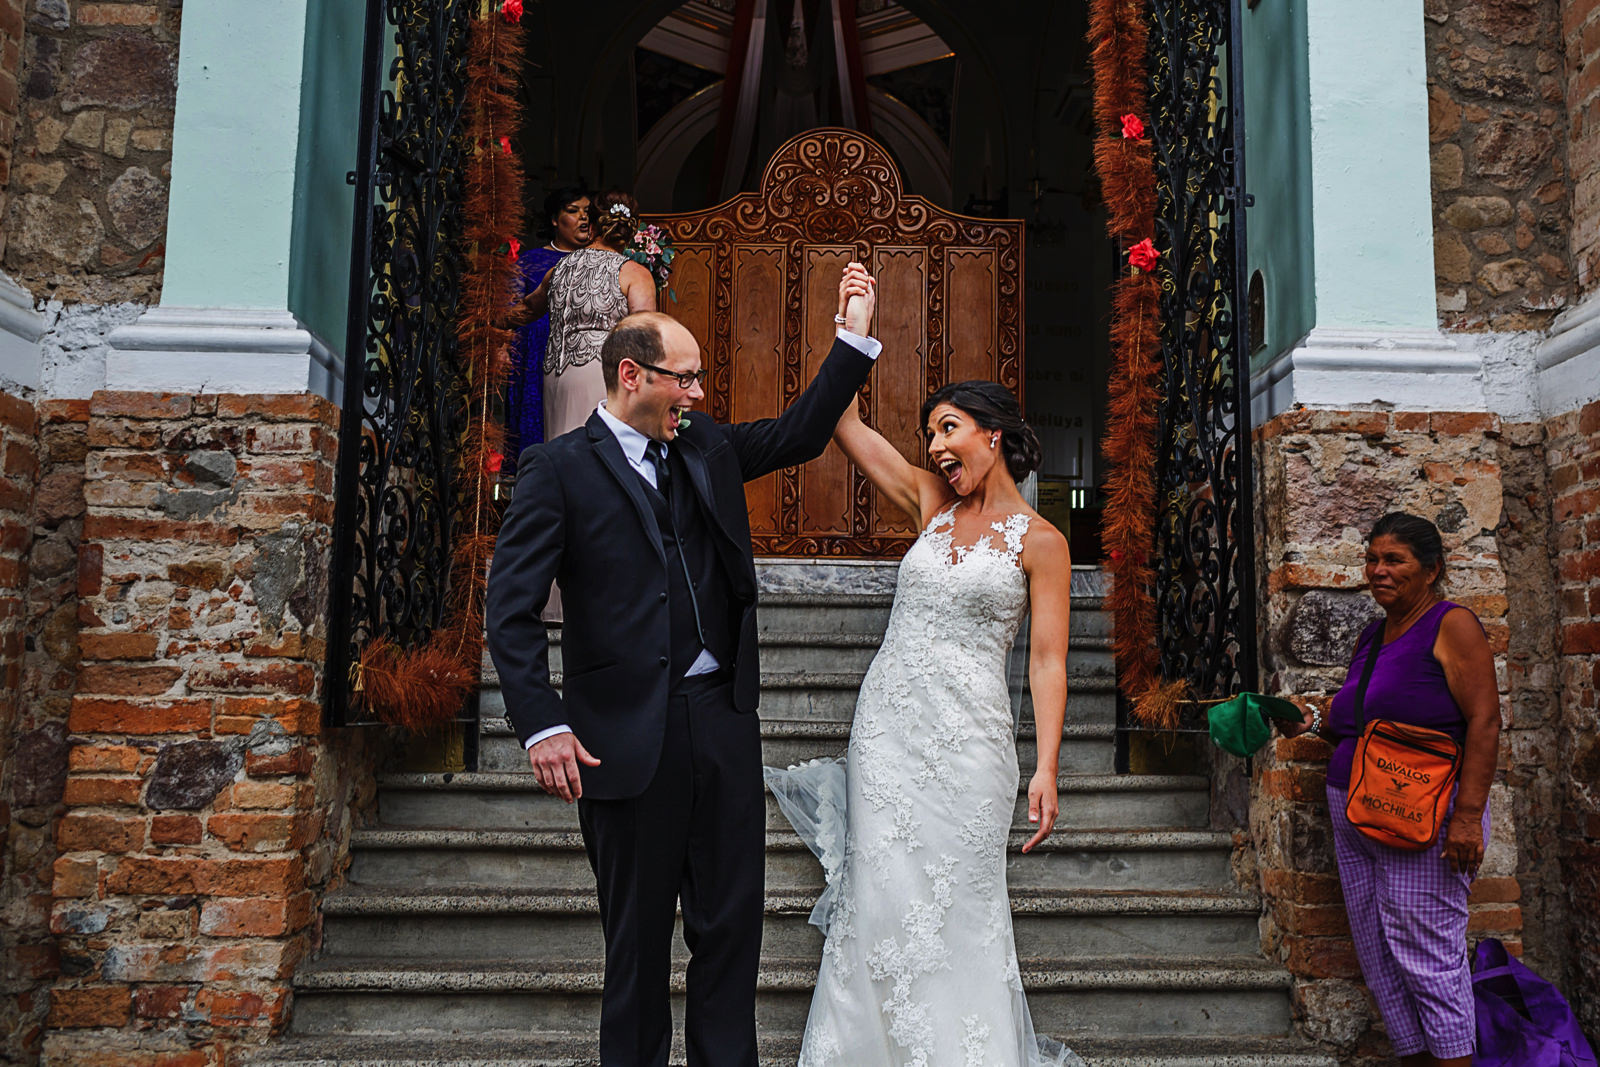 Groom and bride celebrate after wedding ceremony outside Lady of Guadalupe church, downtown Puerto Vallarta, Mexico